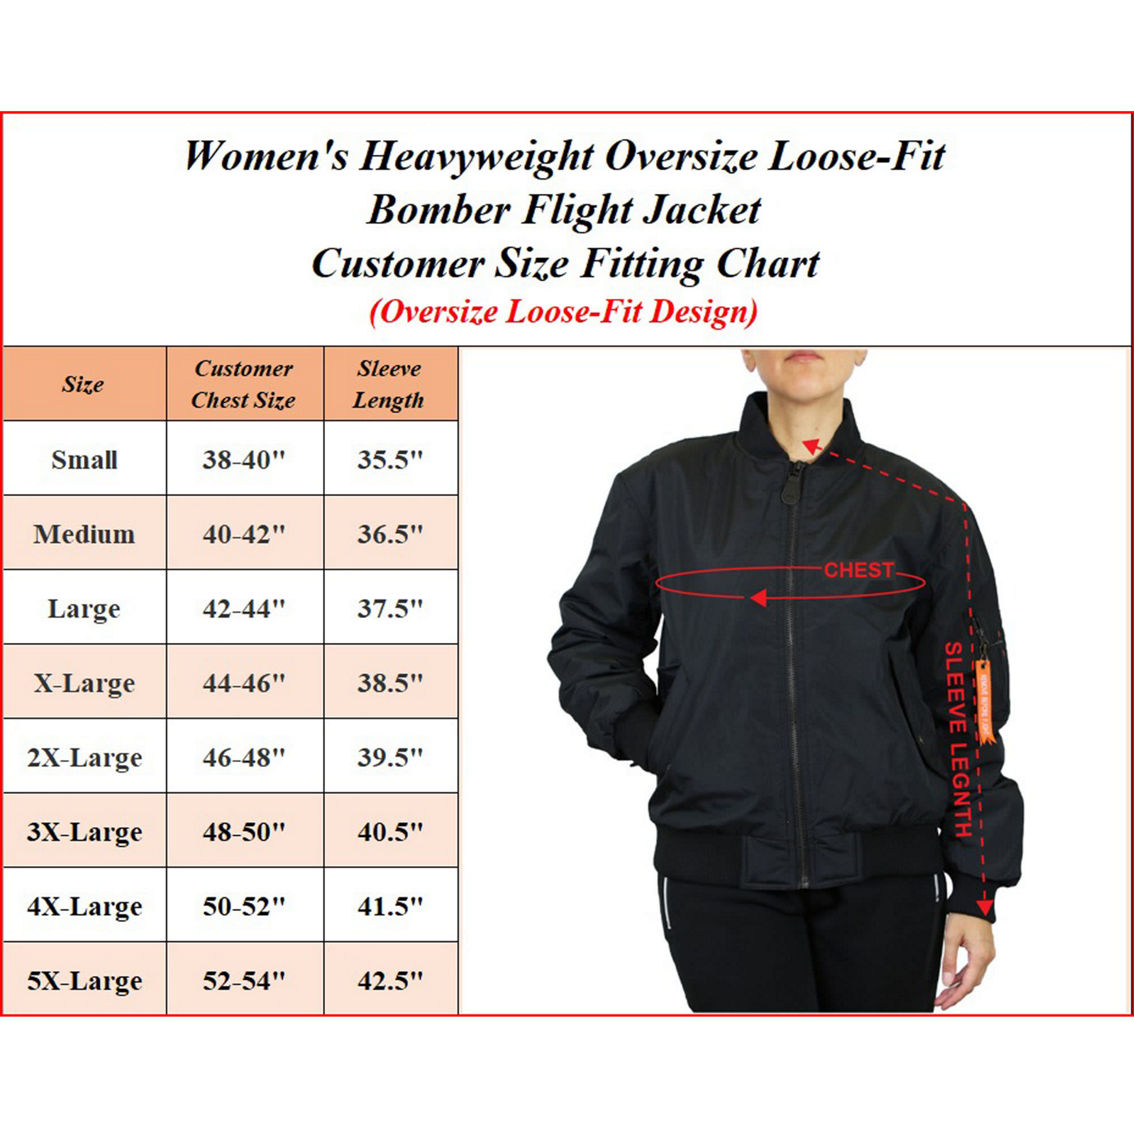 Spire By Galaxy Women's Loose Fit Flight Jacket - Image 2 of 2